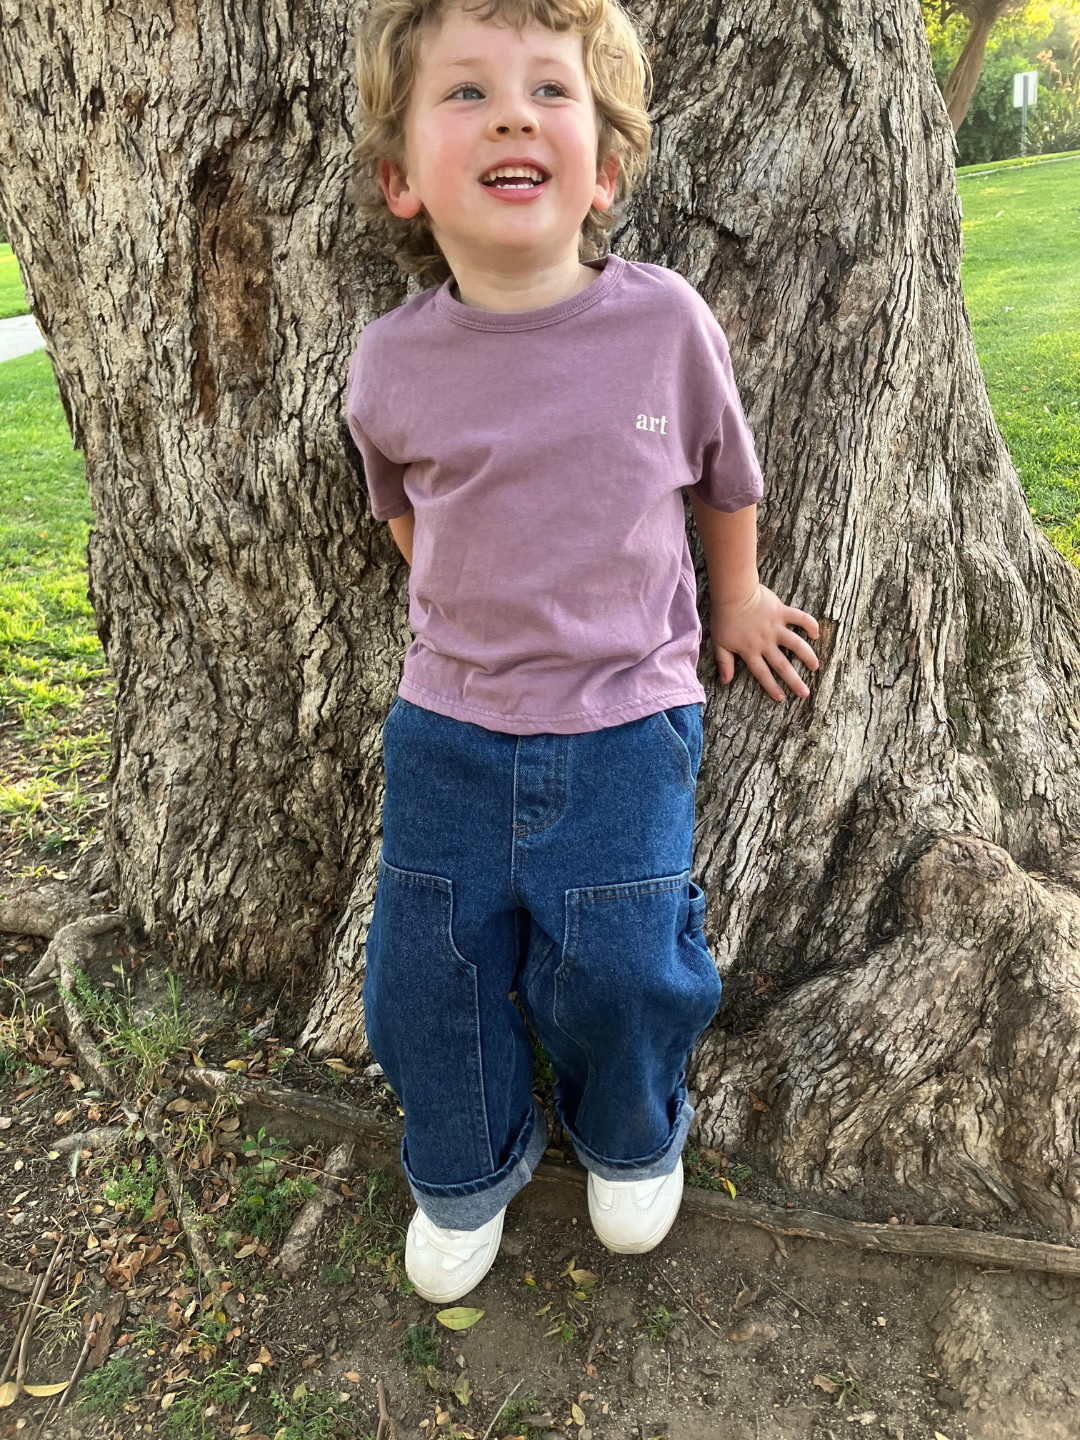 A child is wearing the Studio Tee in Mauve with dark denim jeans and white sneakers, standing next to a tree